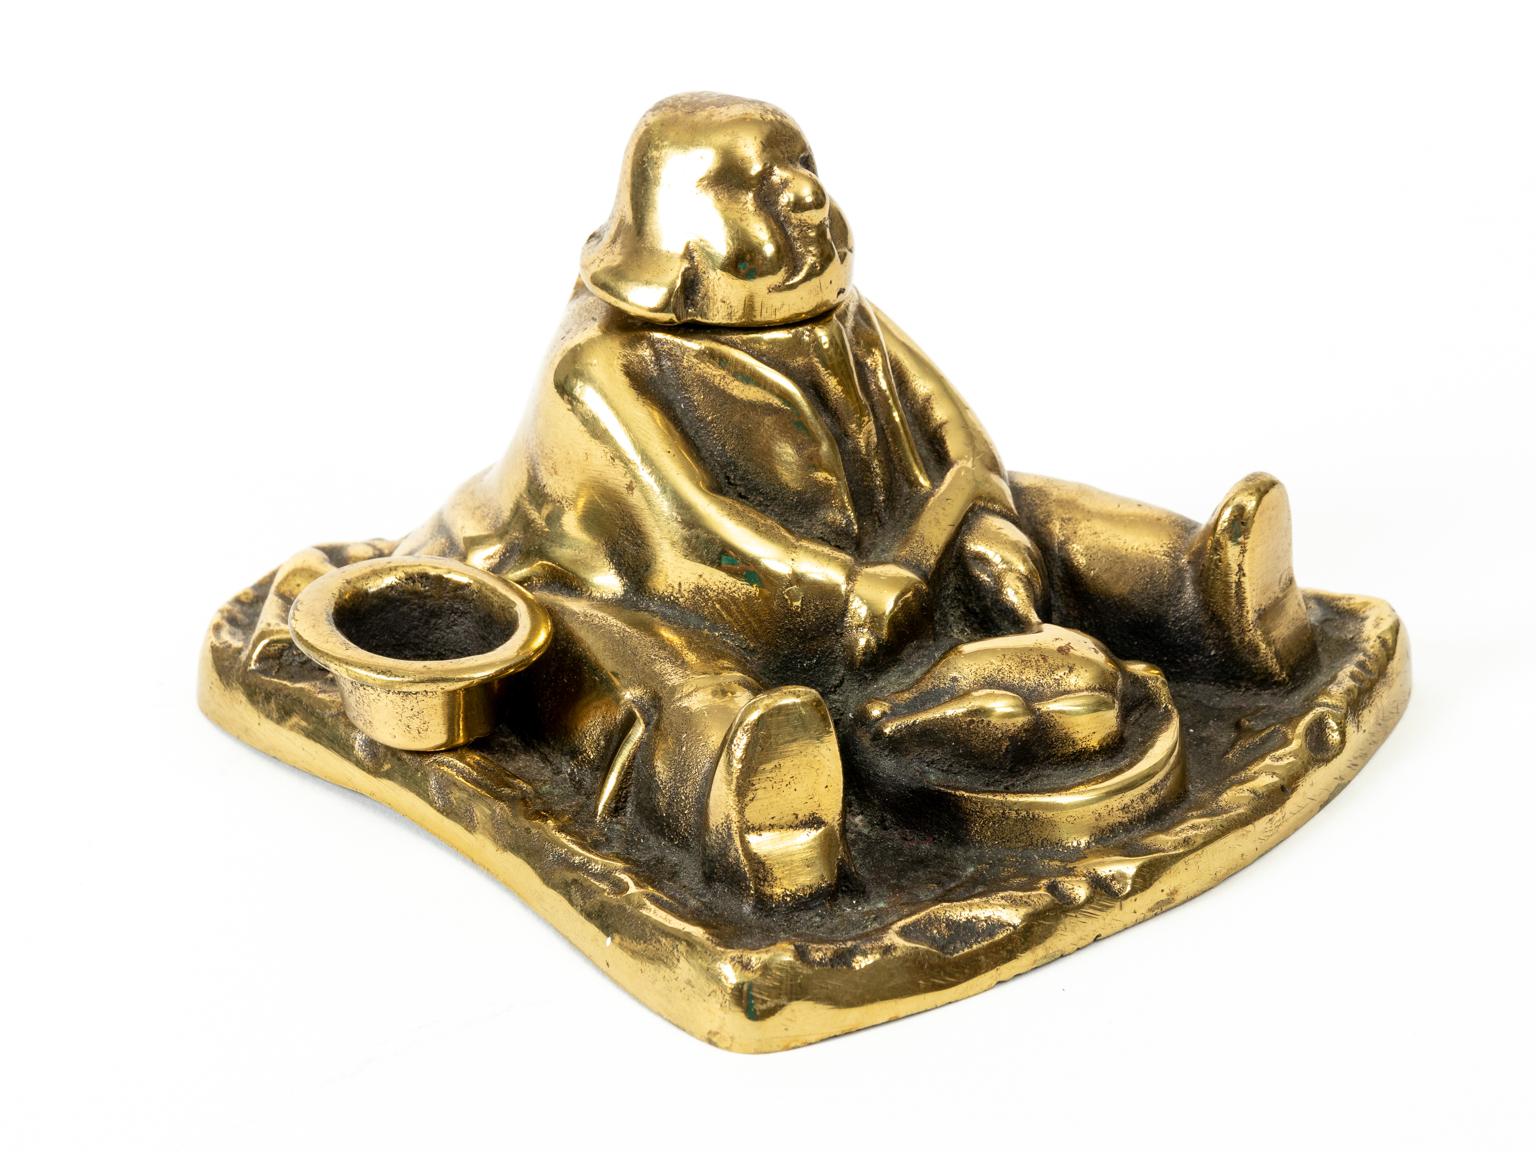 Vintage English brass figural inkwell depicting a seated Daniel Lambert holding a knife and fork with a plate of food in front of him. The piece was made in England during the first half of the 20th century. Please note wear consistent with age